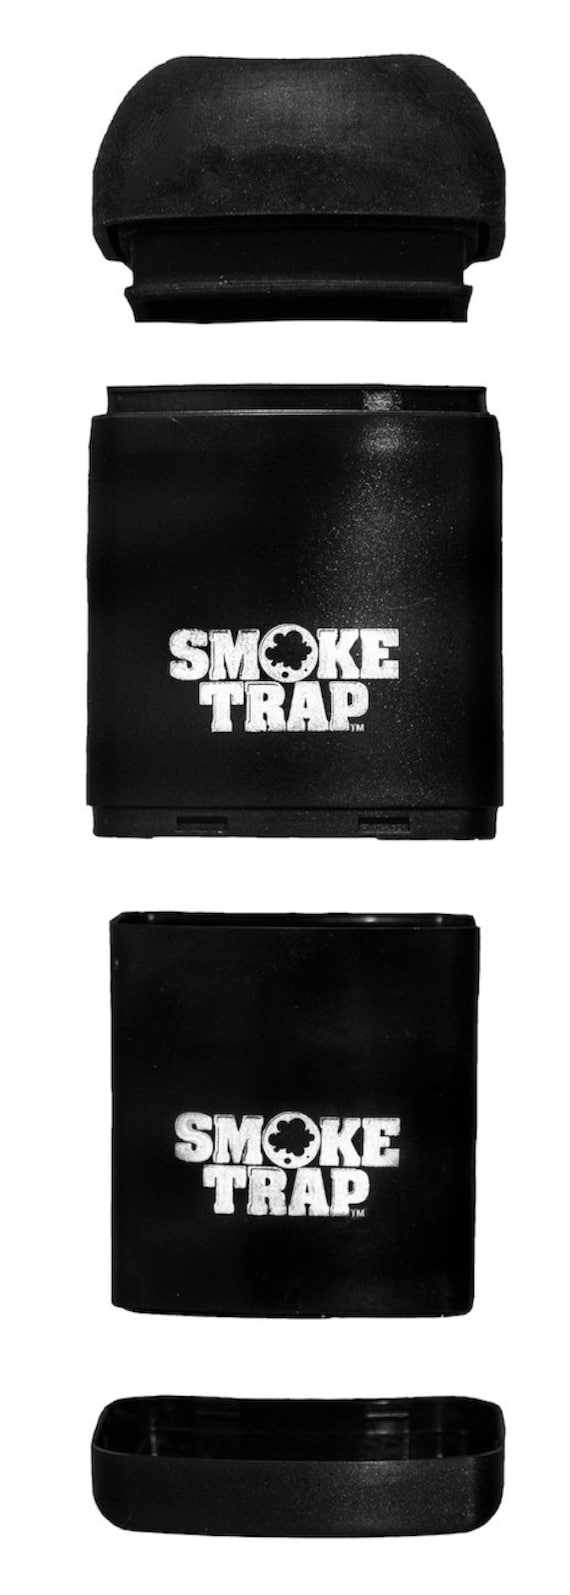  Smoke Trap 2.0 - Personal Air Filter (Sploof) - Smoke Filter  with Replaceable Filter - 300+ Uses (Black) : Health & Household